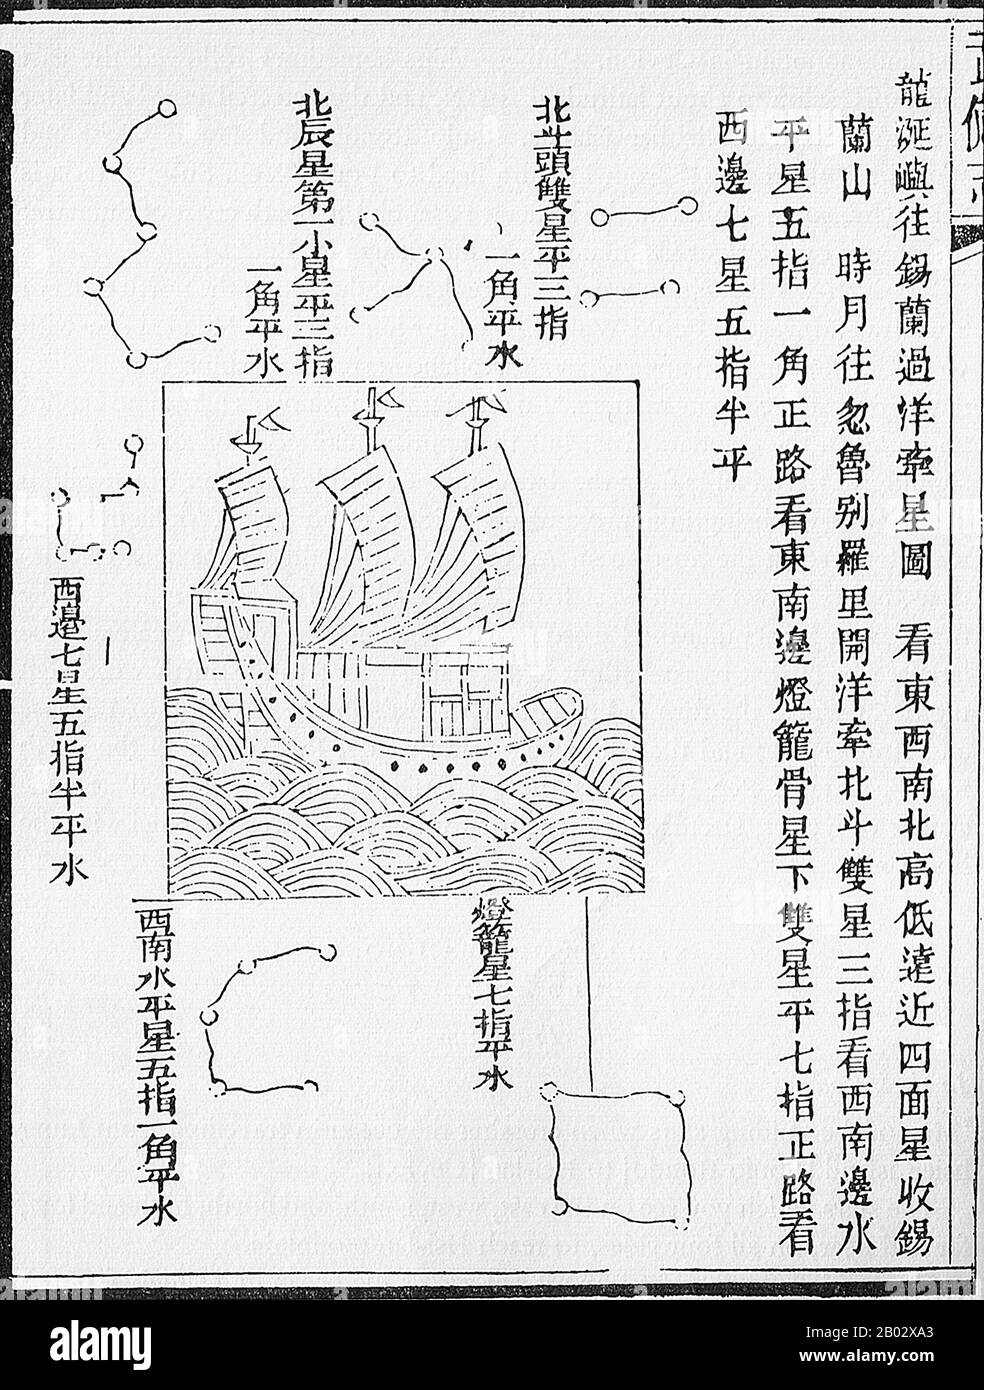 Between 1405 and 1433, the Ming government sponsored a series of seven naval expeditions. The Yongle emperor designed them to establish a Chinese presence, impose imperial control over trade, impress foreign peoples in the Indian Ocean basin and extend the empire's tributary system.  Zheng He was placed as the admiral in control of the huge fleet and armed forces that undertook these expeditions. Zheng He's first voyage consisted of a fleet of up to 317 ships holding almost 28,000 crewmen, with each ship housing up to 500 men.  Zheng He's fleets visited Arabia, Brunei, East Africa, India, the Stock Photo